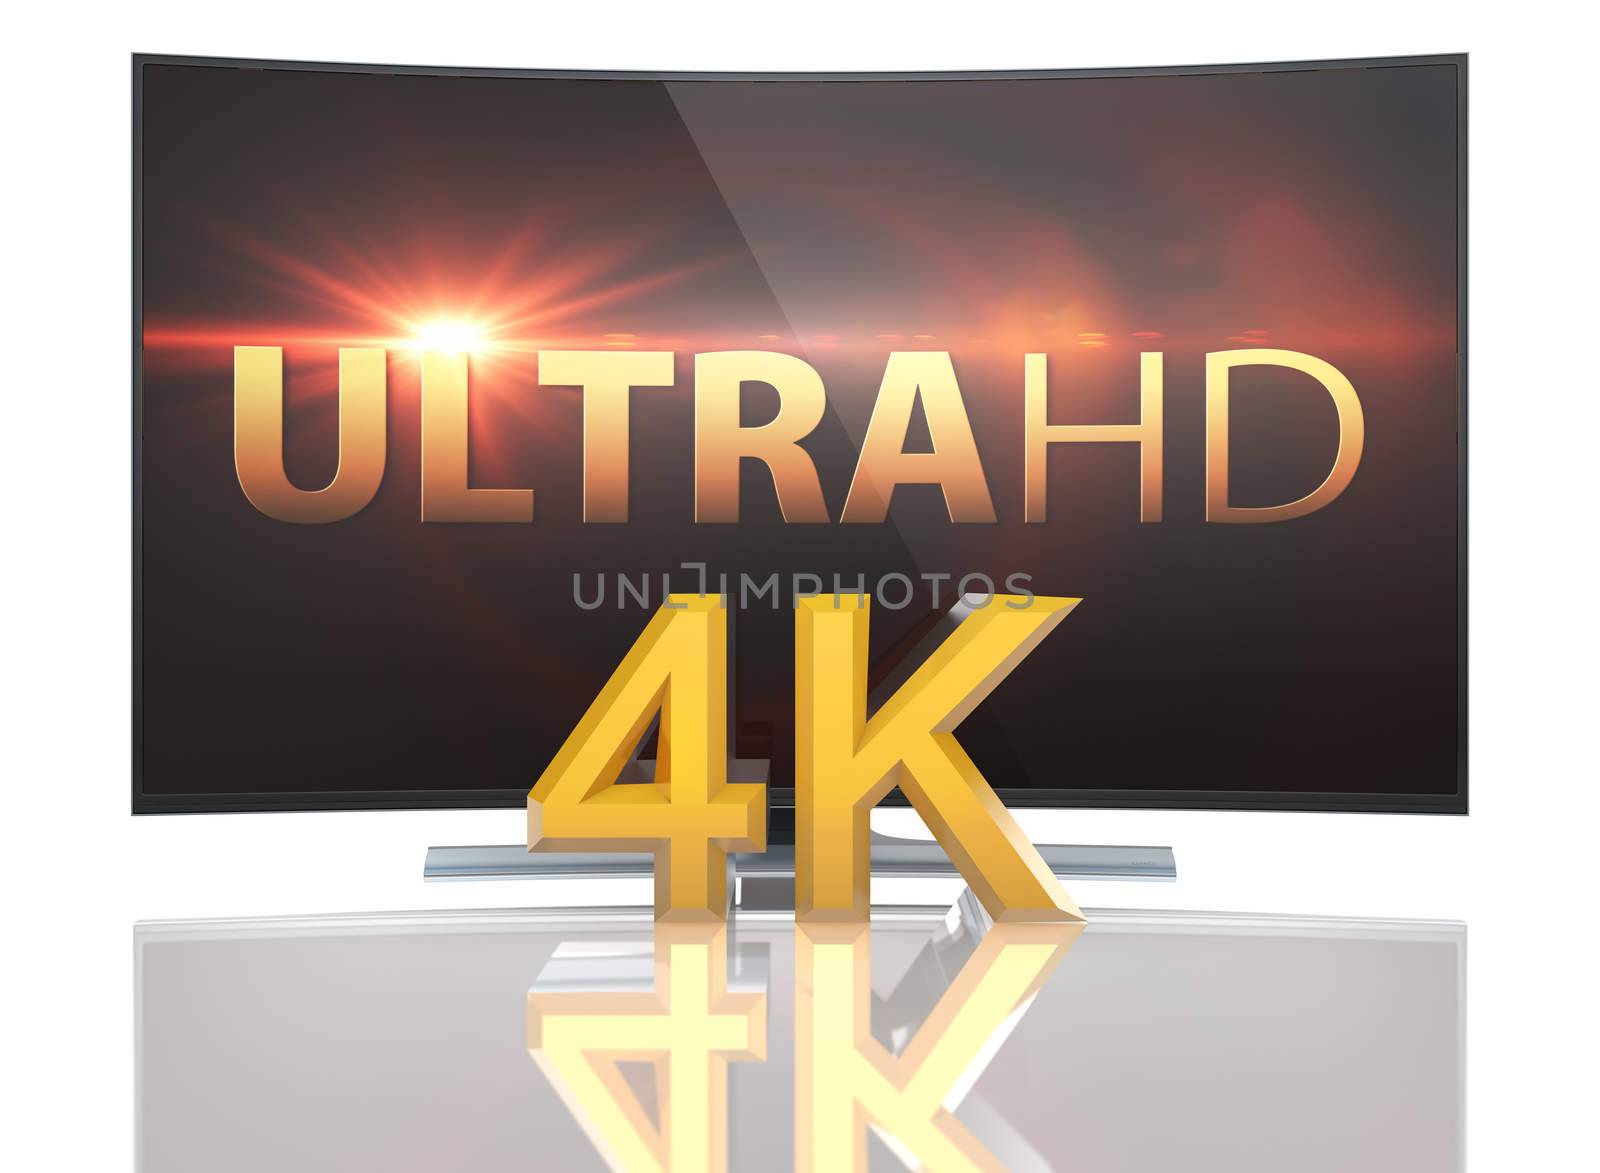 UltraHD Smart Tv with Curved screen by manaemedia